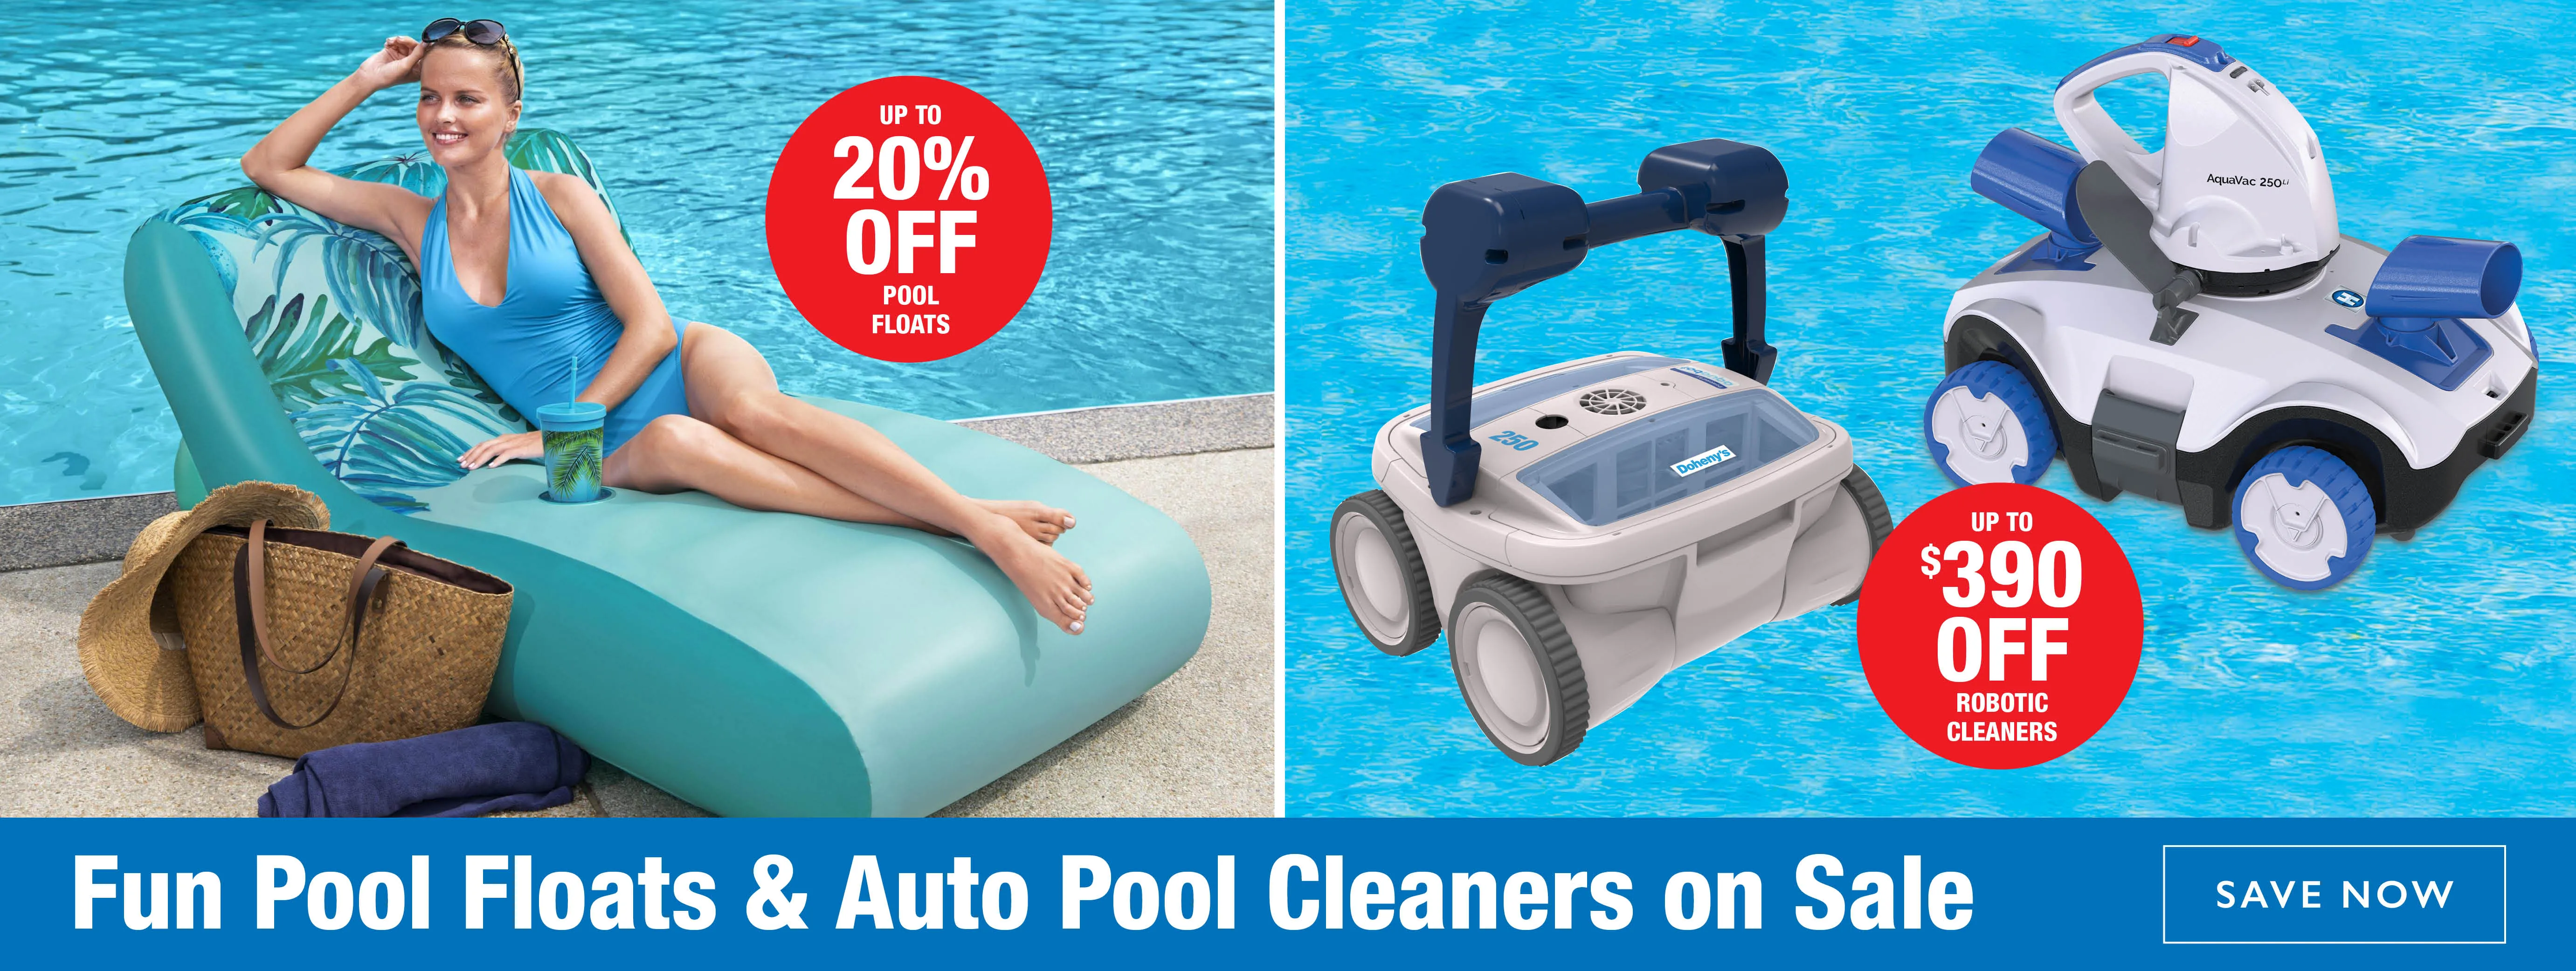 Fun Pool Floats and Automatic Pool Cleaners on Sale